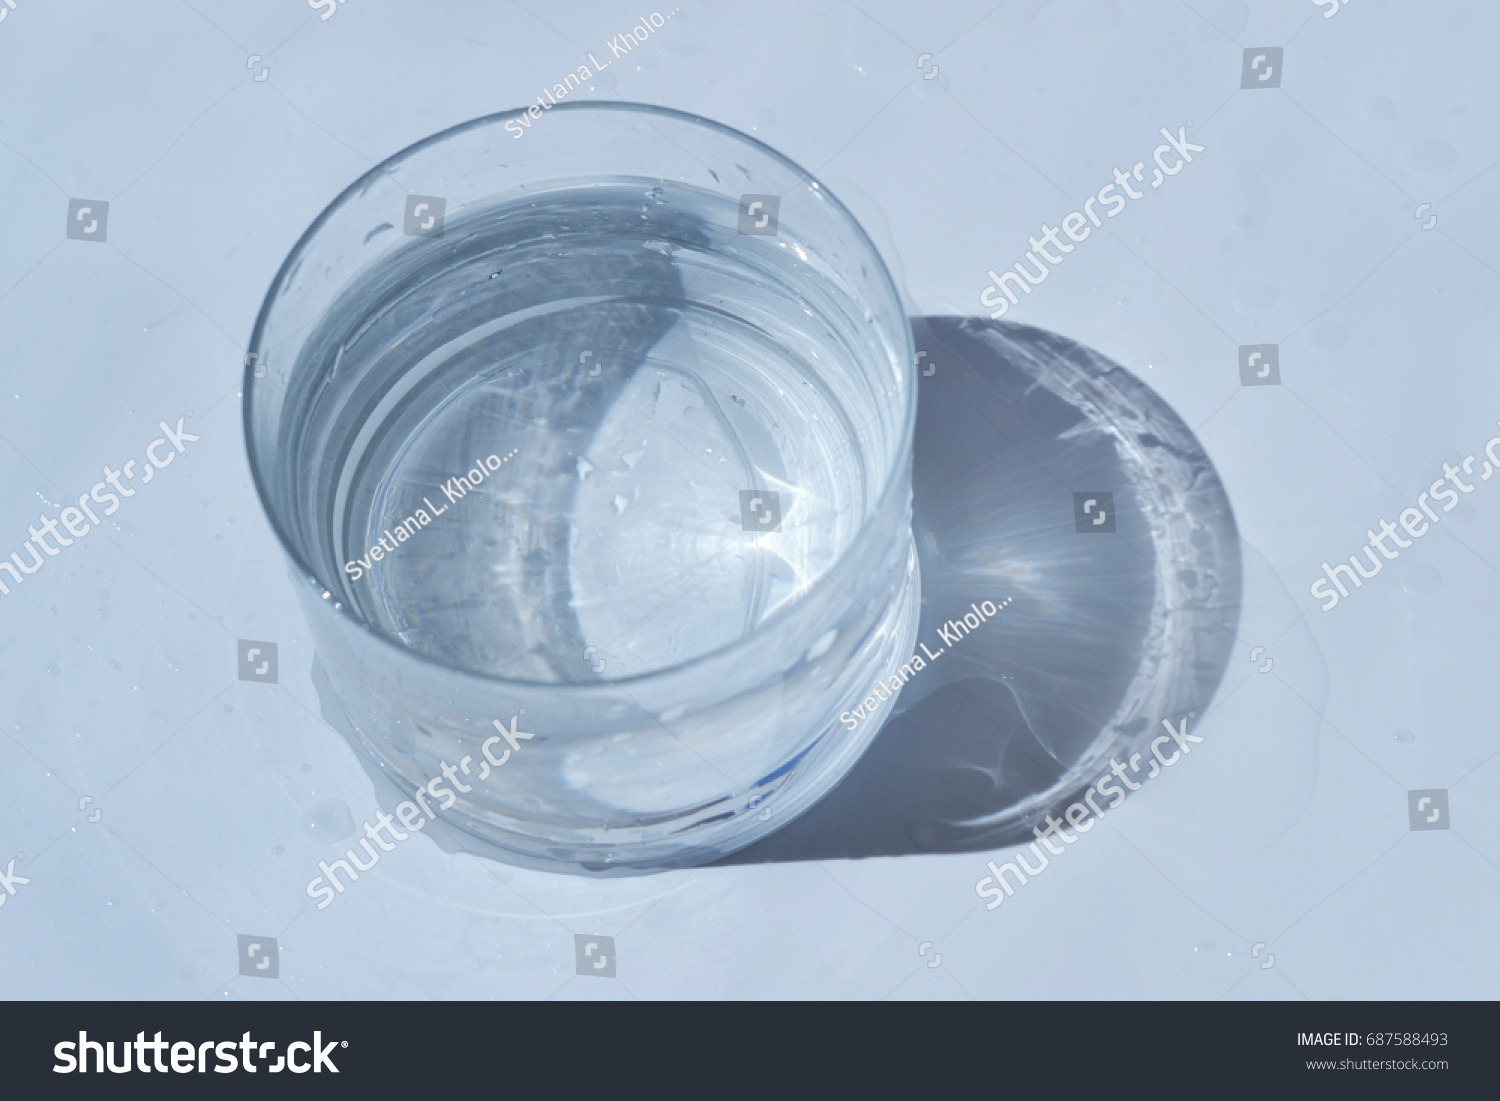 Pure water in a glass #687588493